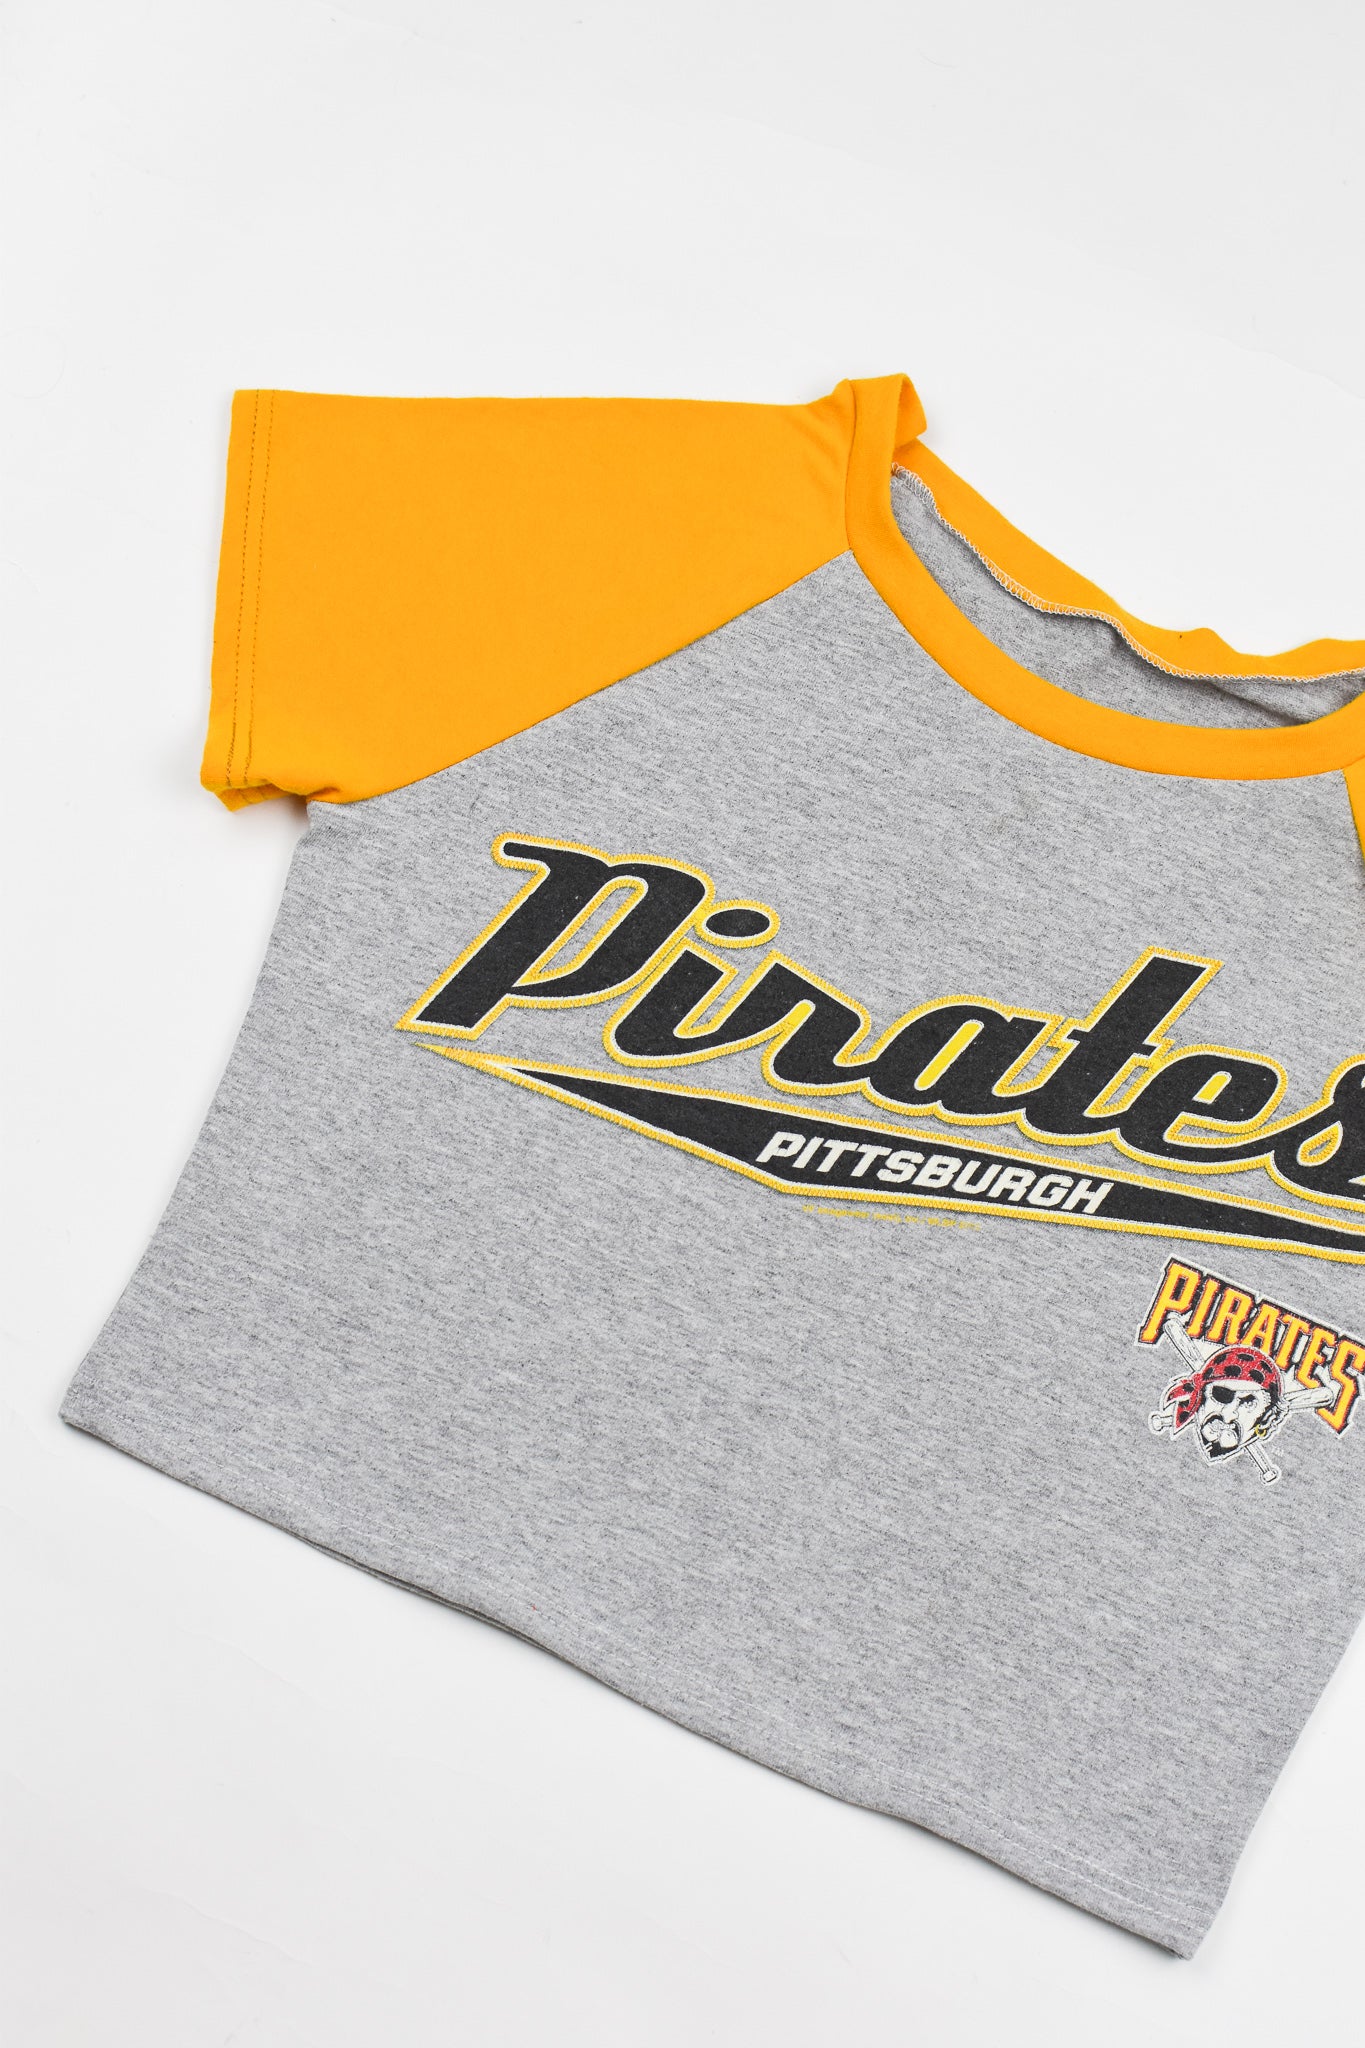 Upcycled Pirates Baby Tee